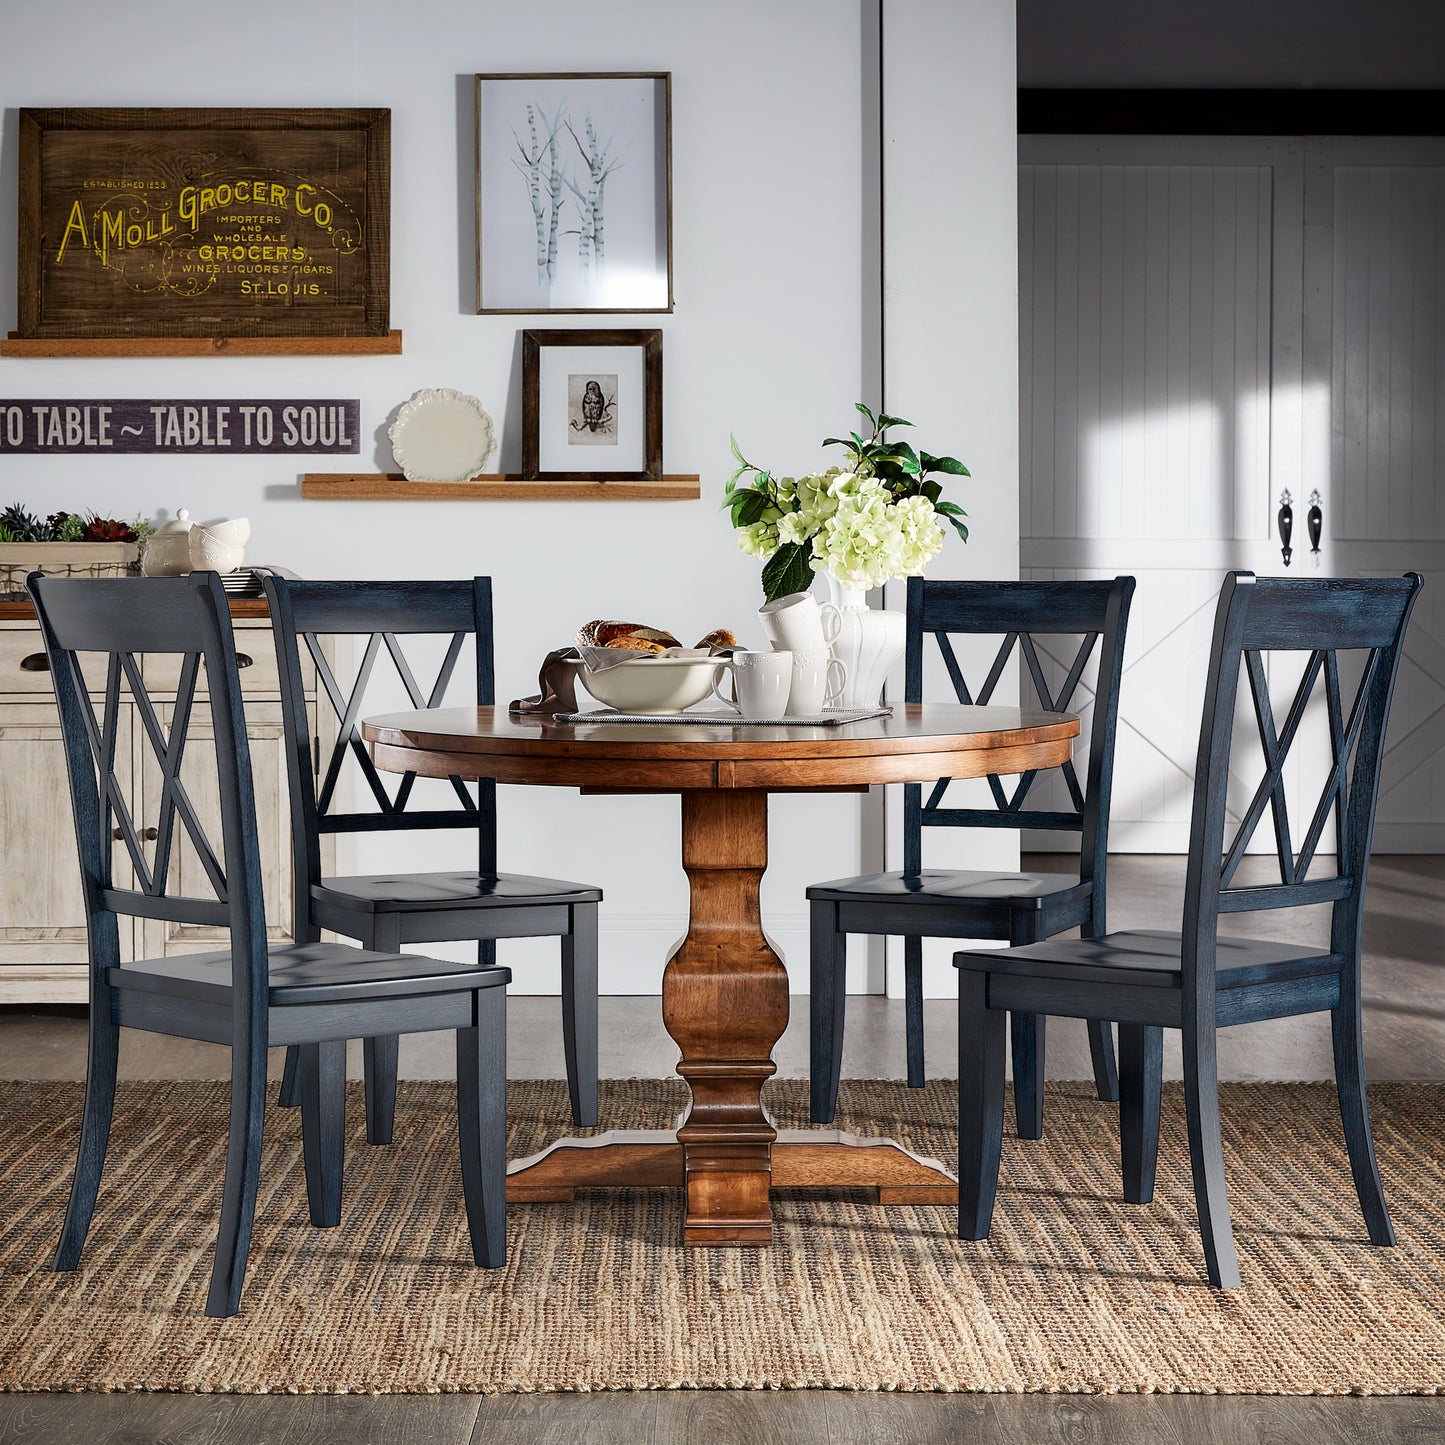 Double X Back Wood Dining Chairs (Set of 2) - Antique Dark Denim Finish